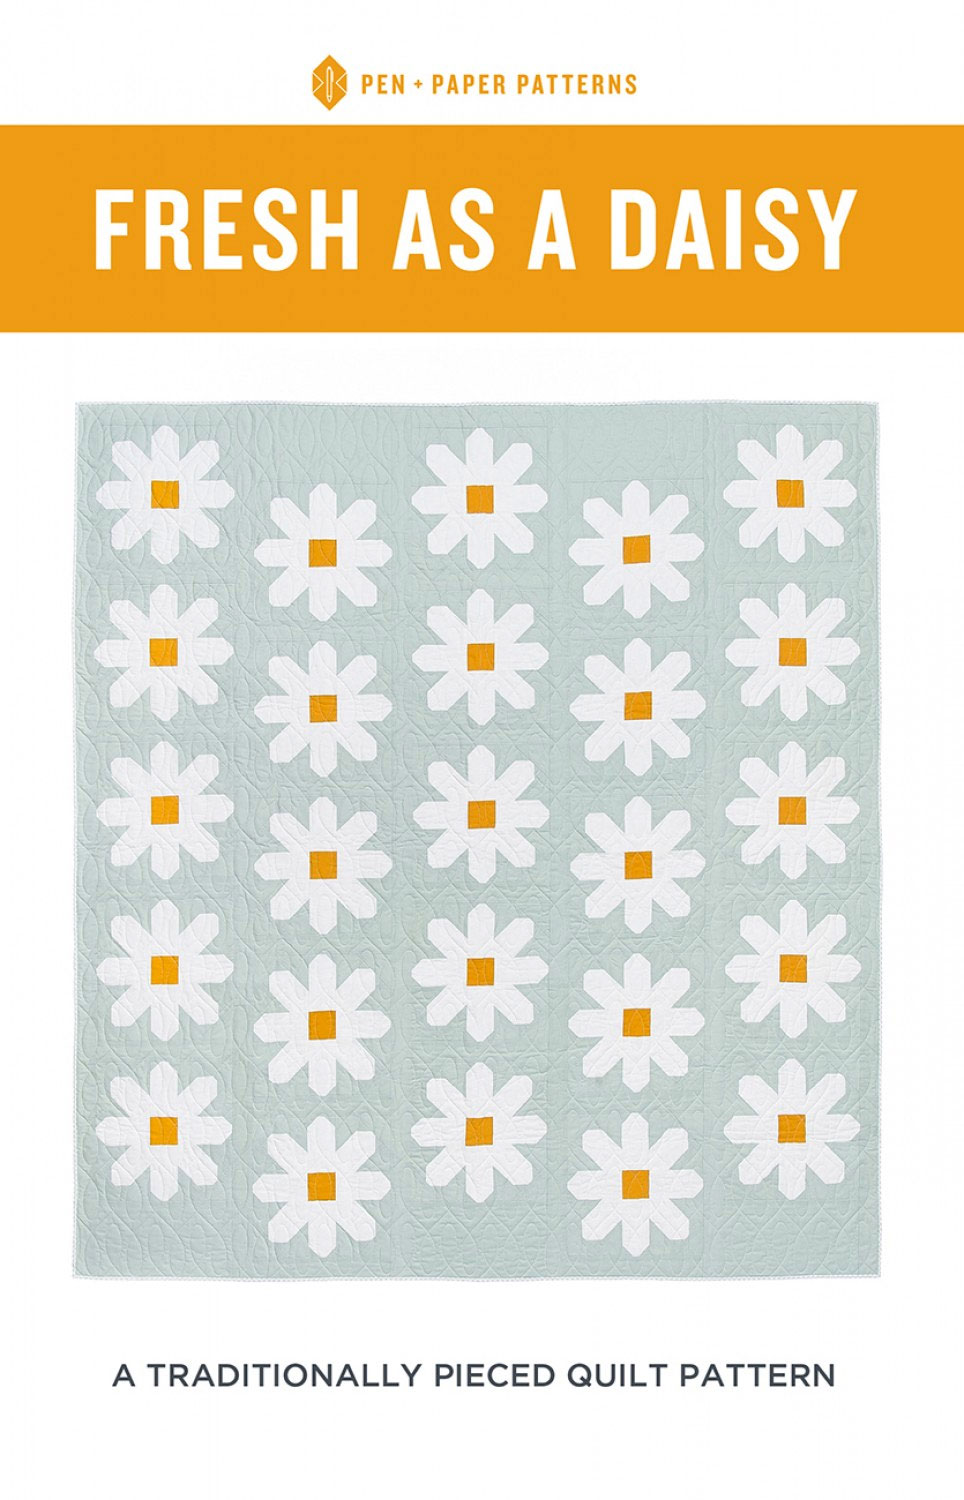 Fresh-As-A-Daisy-quilt-sewing-pattern-from-Pen-plus-paper-patterns-front